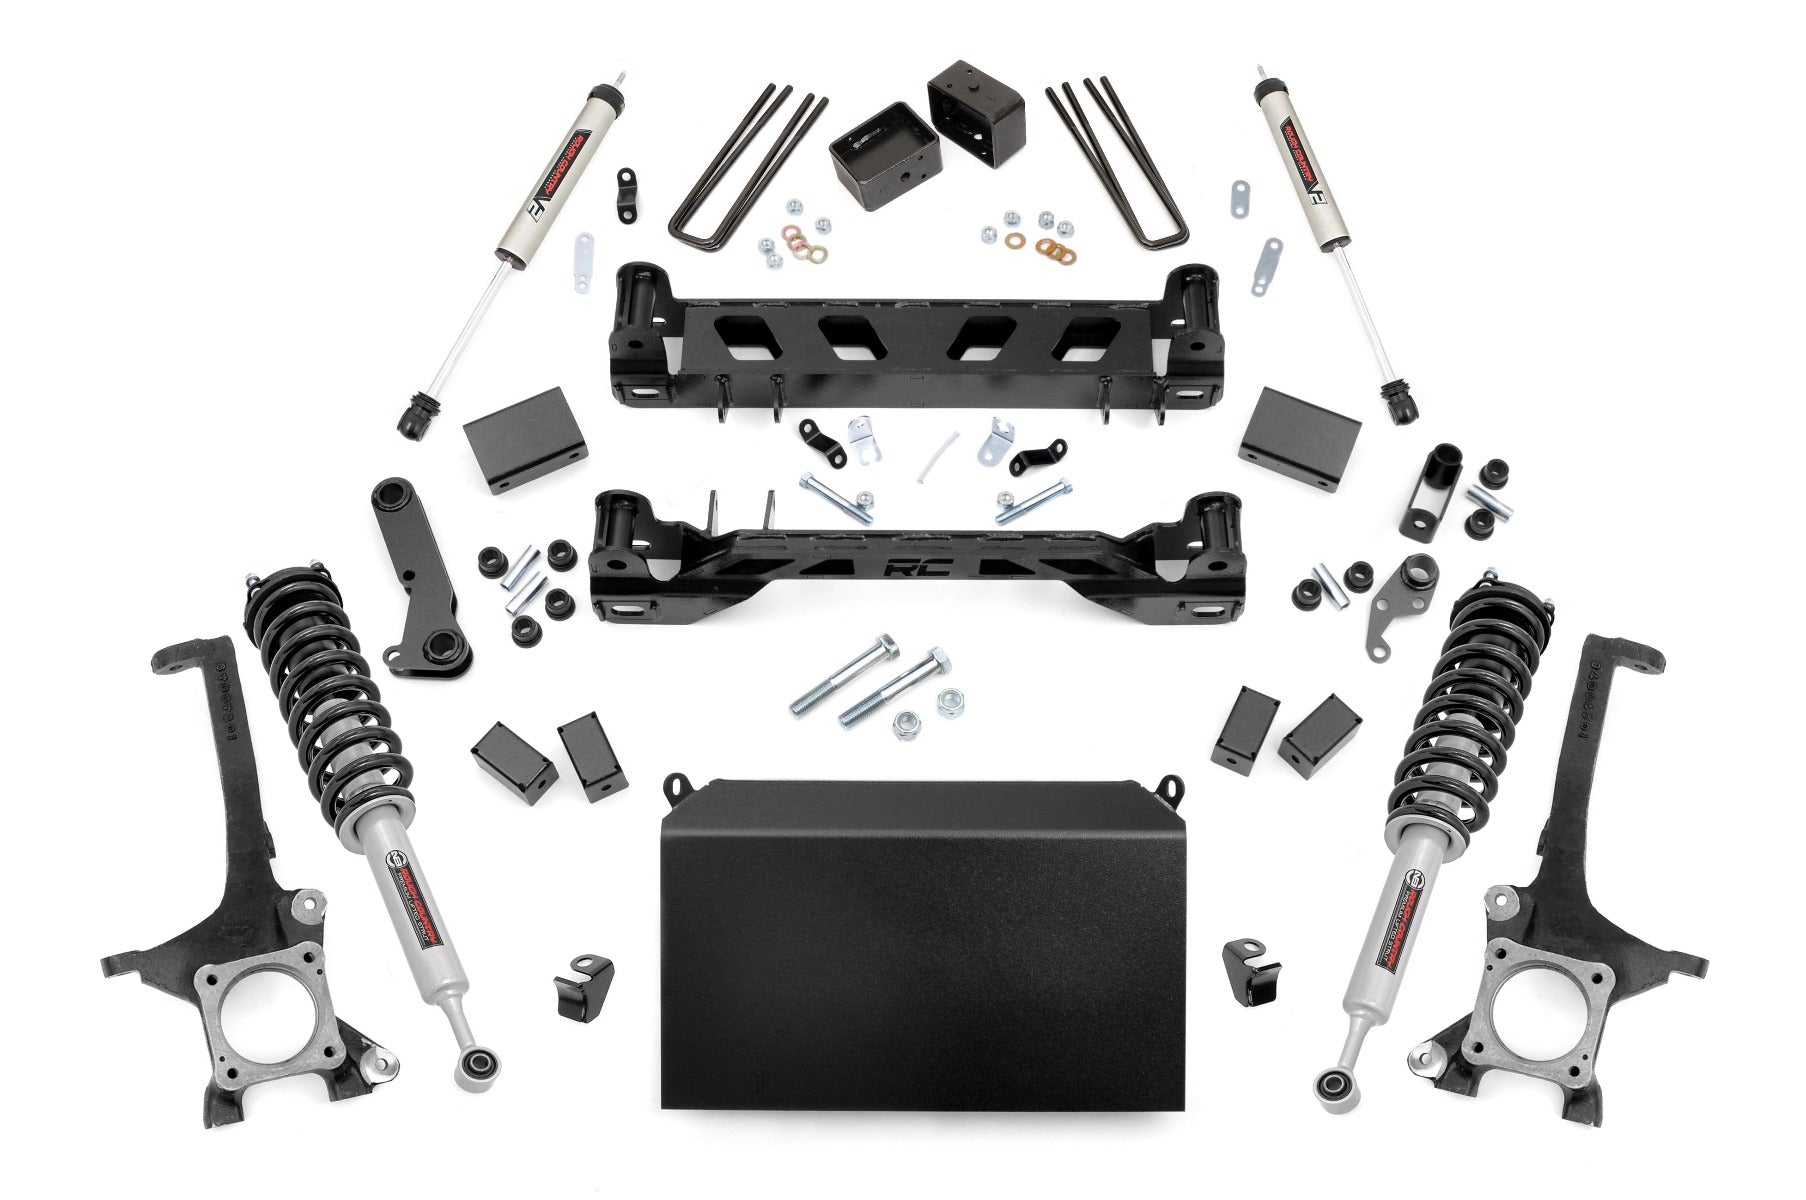 4.0 Inch Toyota Suspension Lift Kit w/ N3 Struts and V2 Shocks For 16-20 Tundra 4WD Rough Country